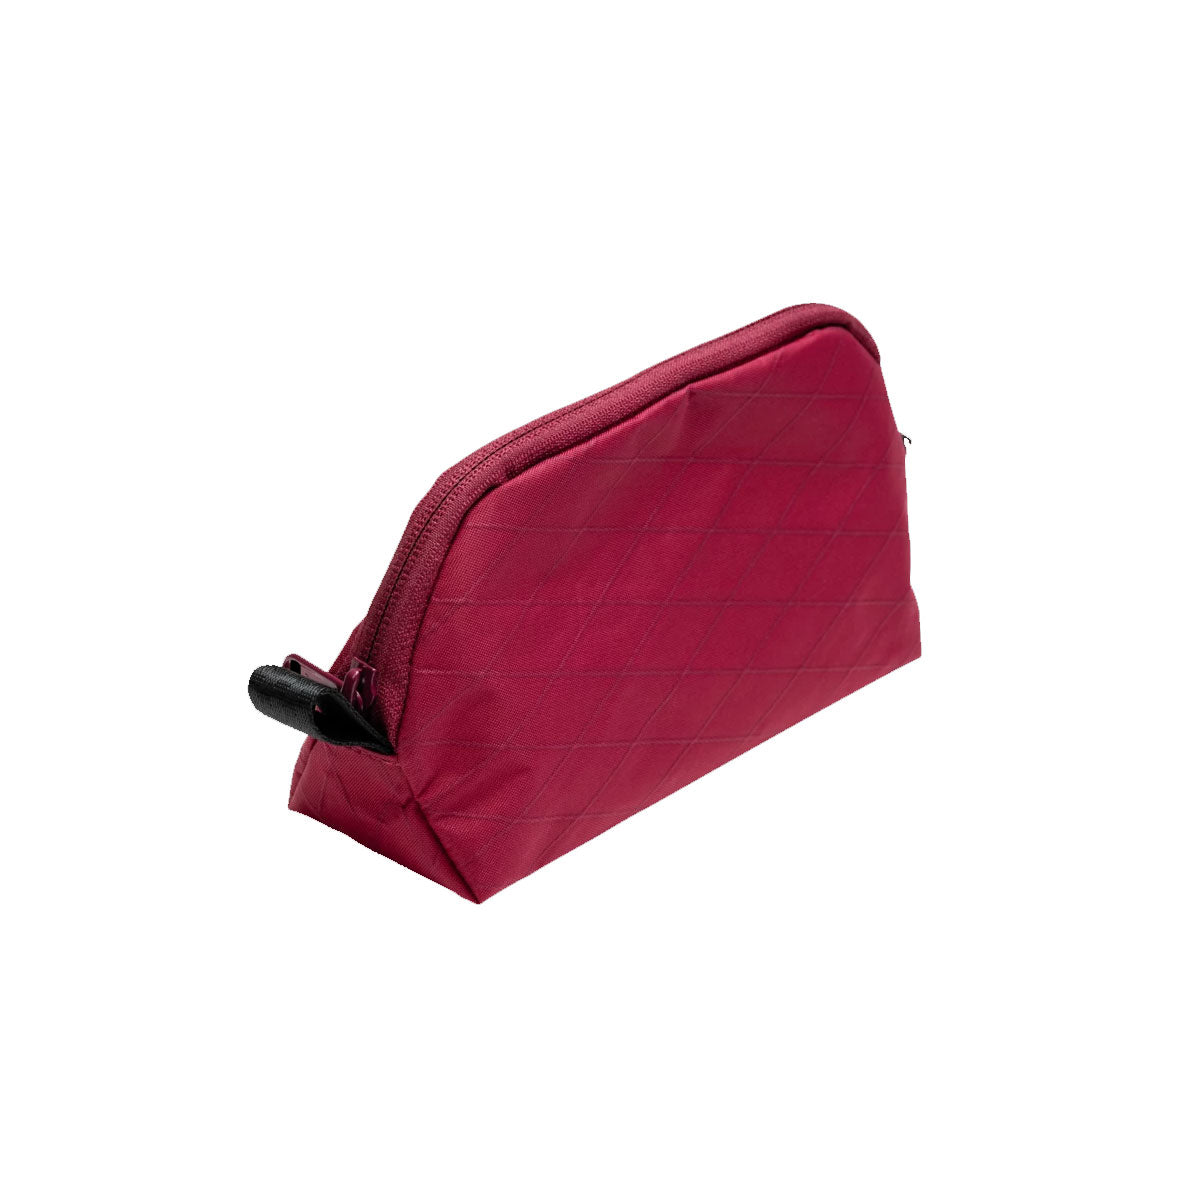 Able Carry : The Daily Stash Pouch : XPAC Port Red